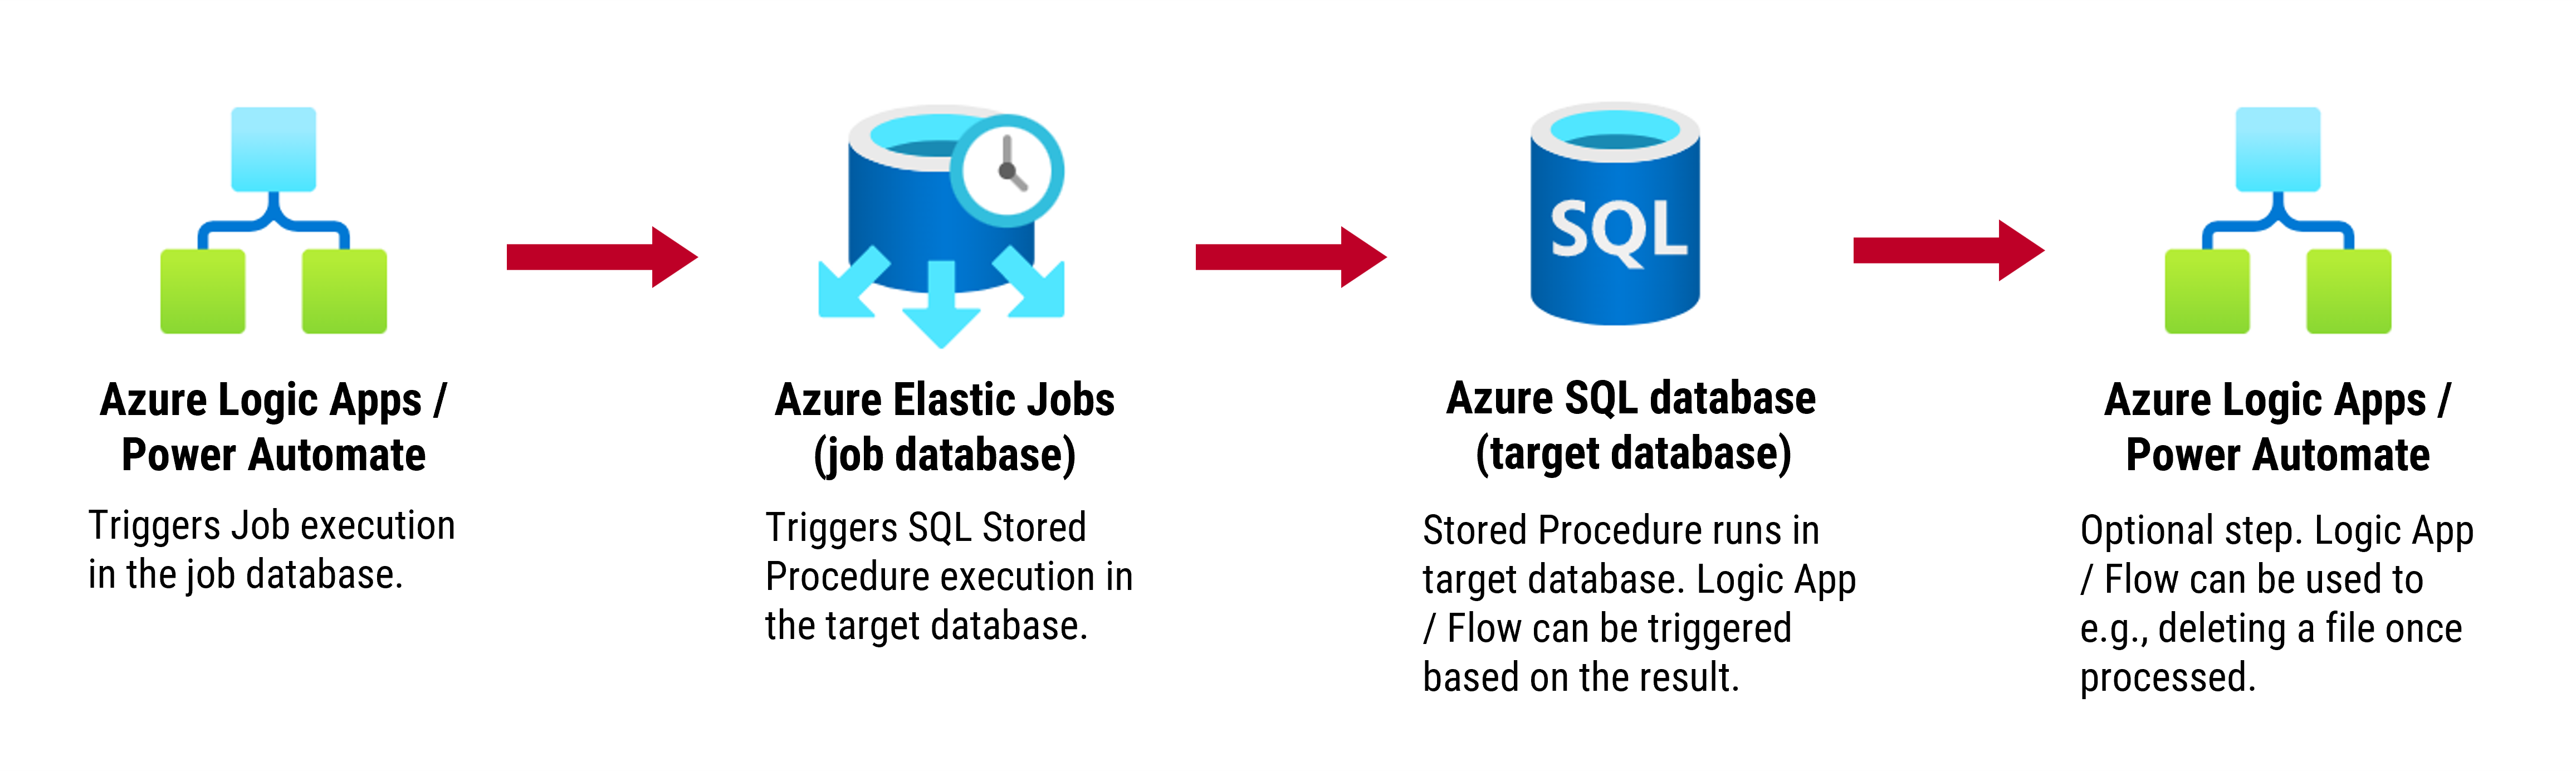 How to use Azure Elastic Jobs to deal with long-running SQL Stored Procedures triggered from Logic Apps or Power Automate